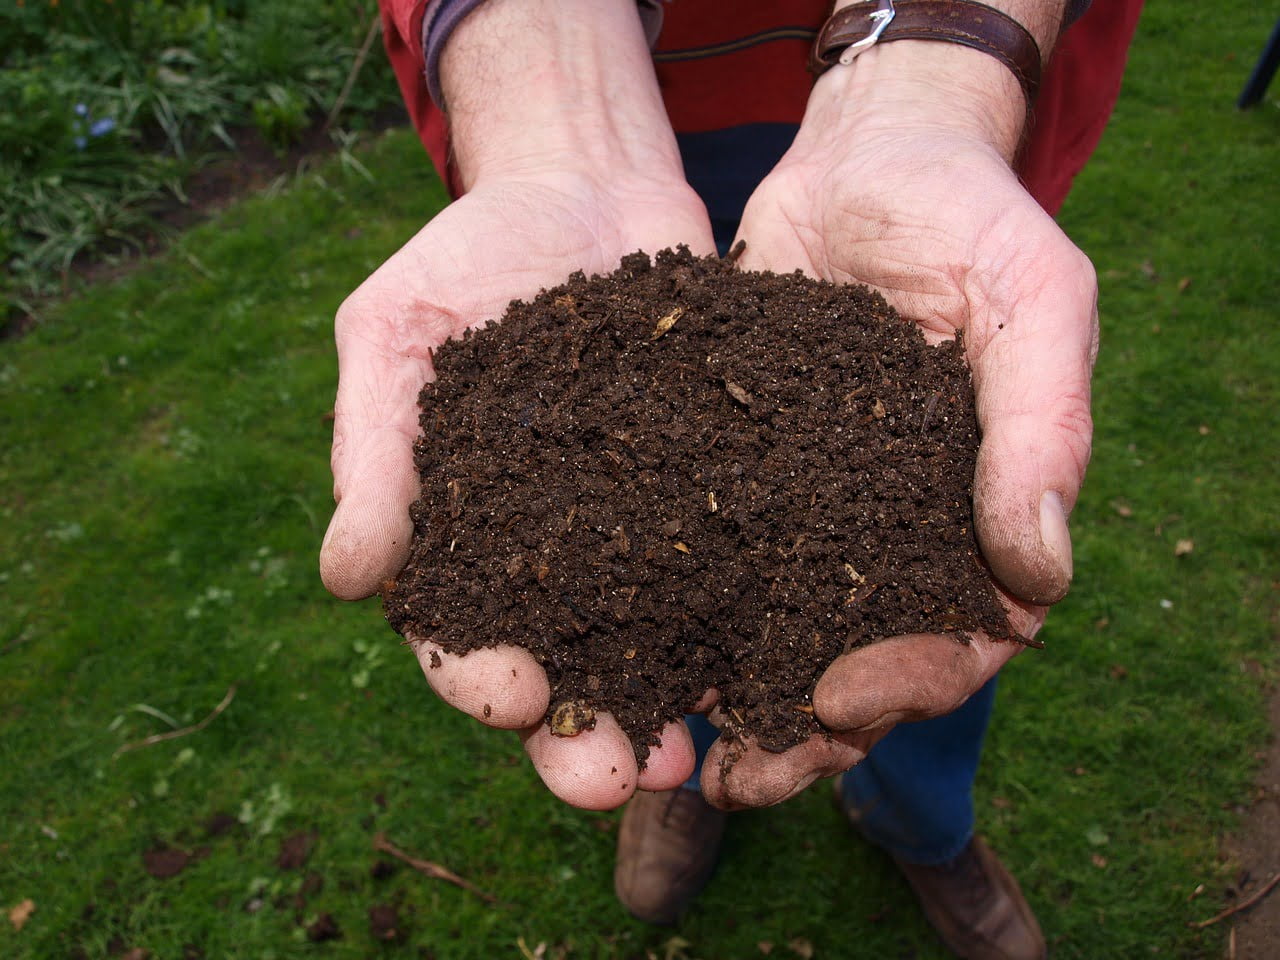 Hand showing the compost soil